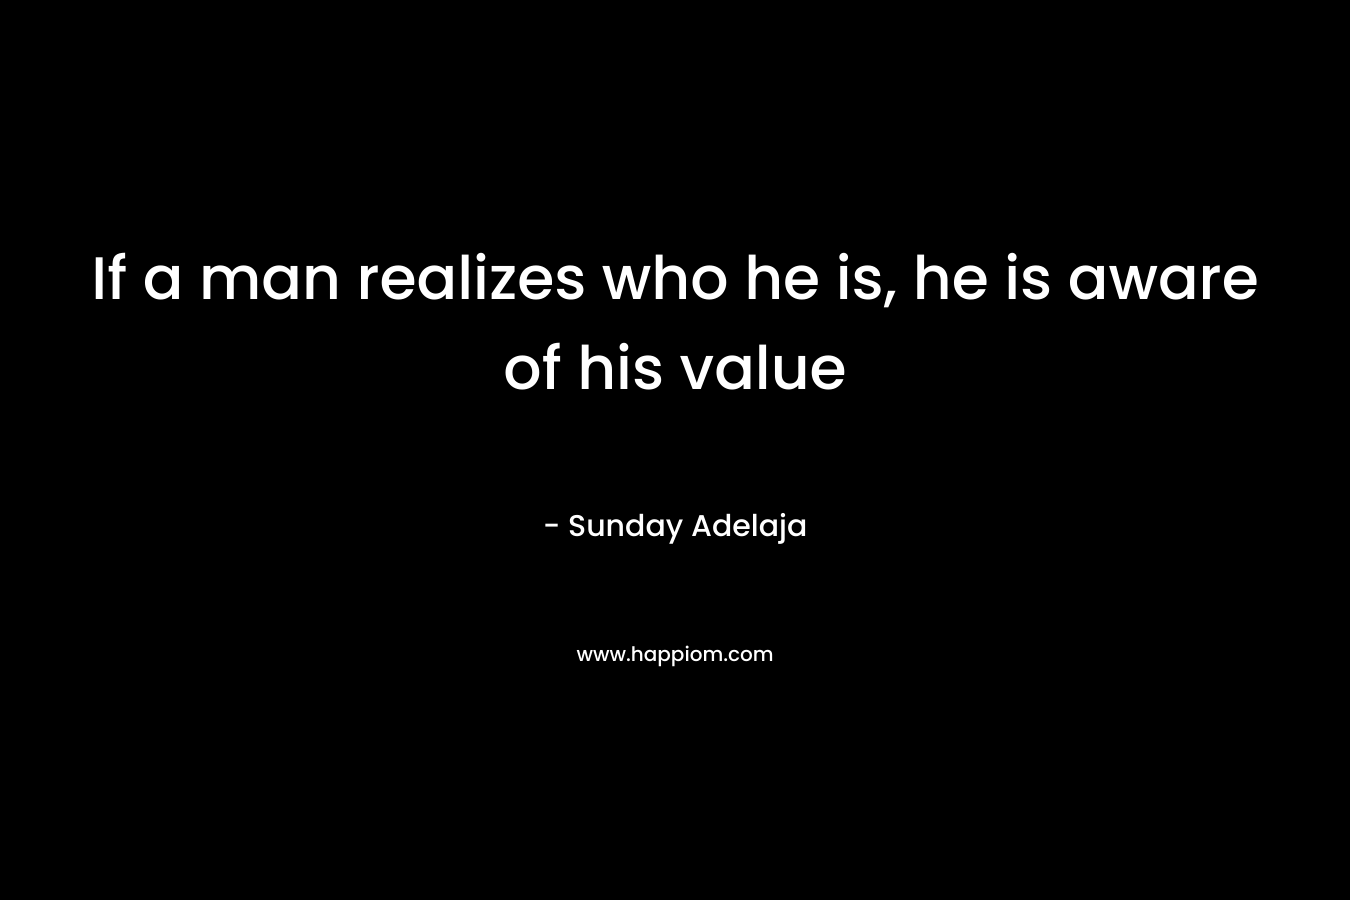 If a man realizes who he is, he is aware of his value